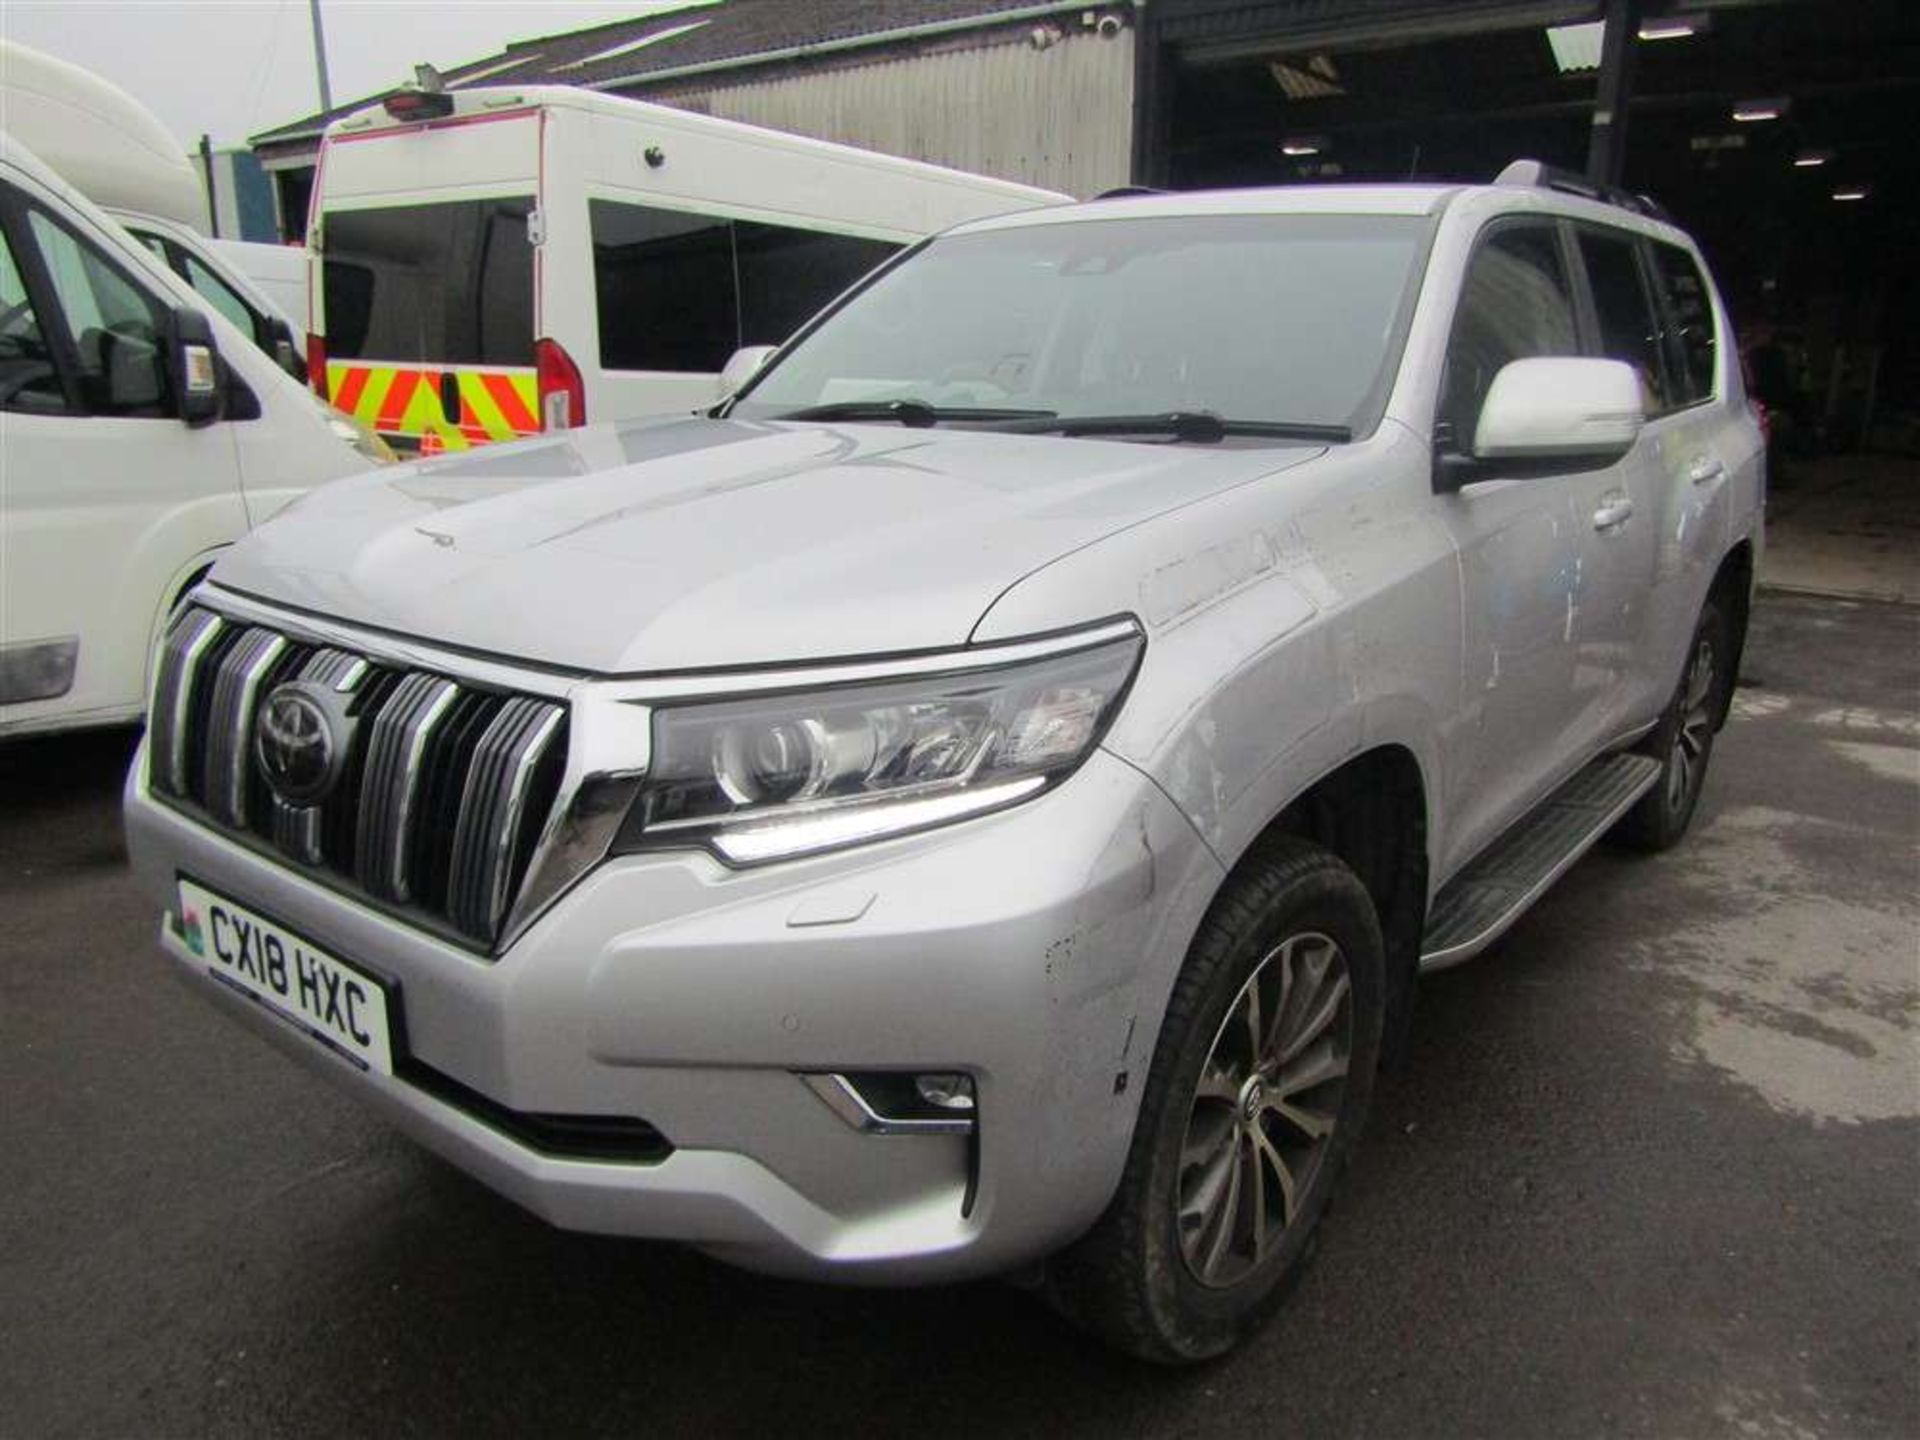 2018 18 reg Toyota Land Cruiser Icon D-4D Auto (Direct Council) - Image 2 of 7